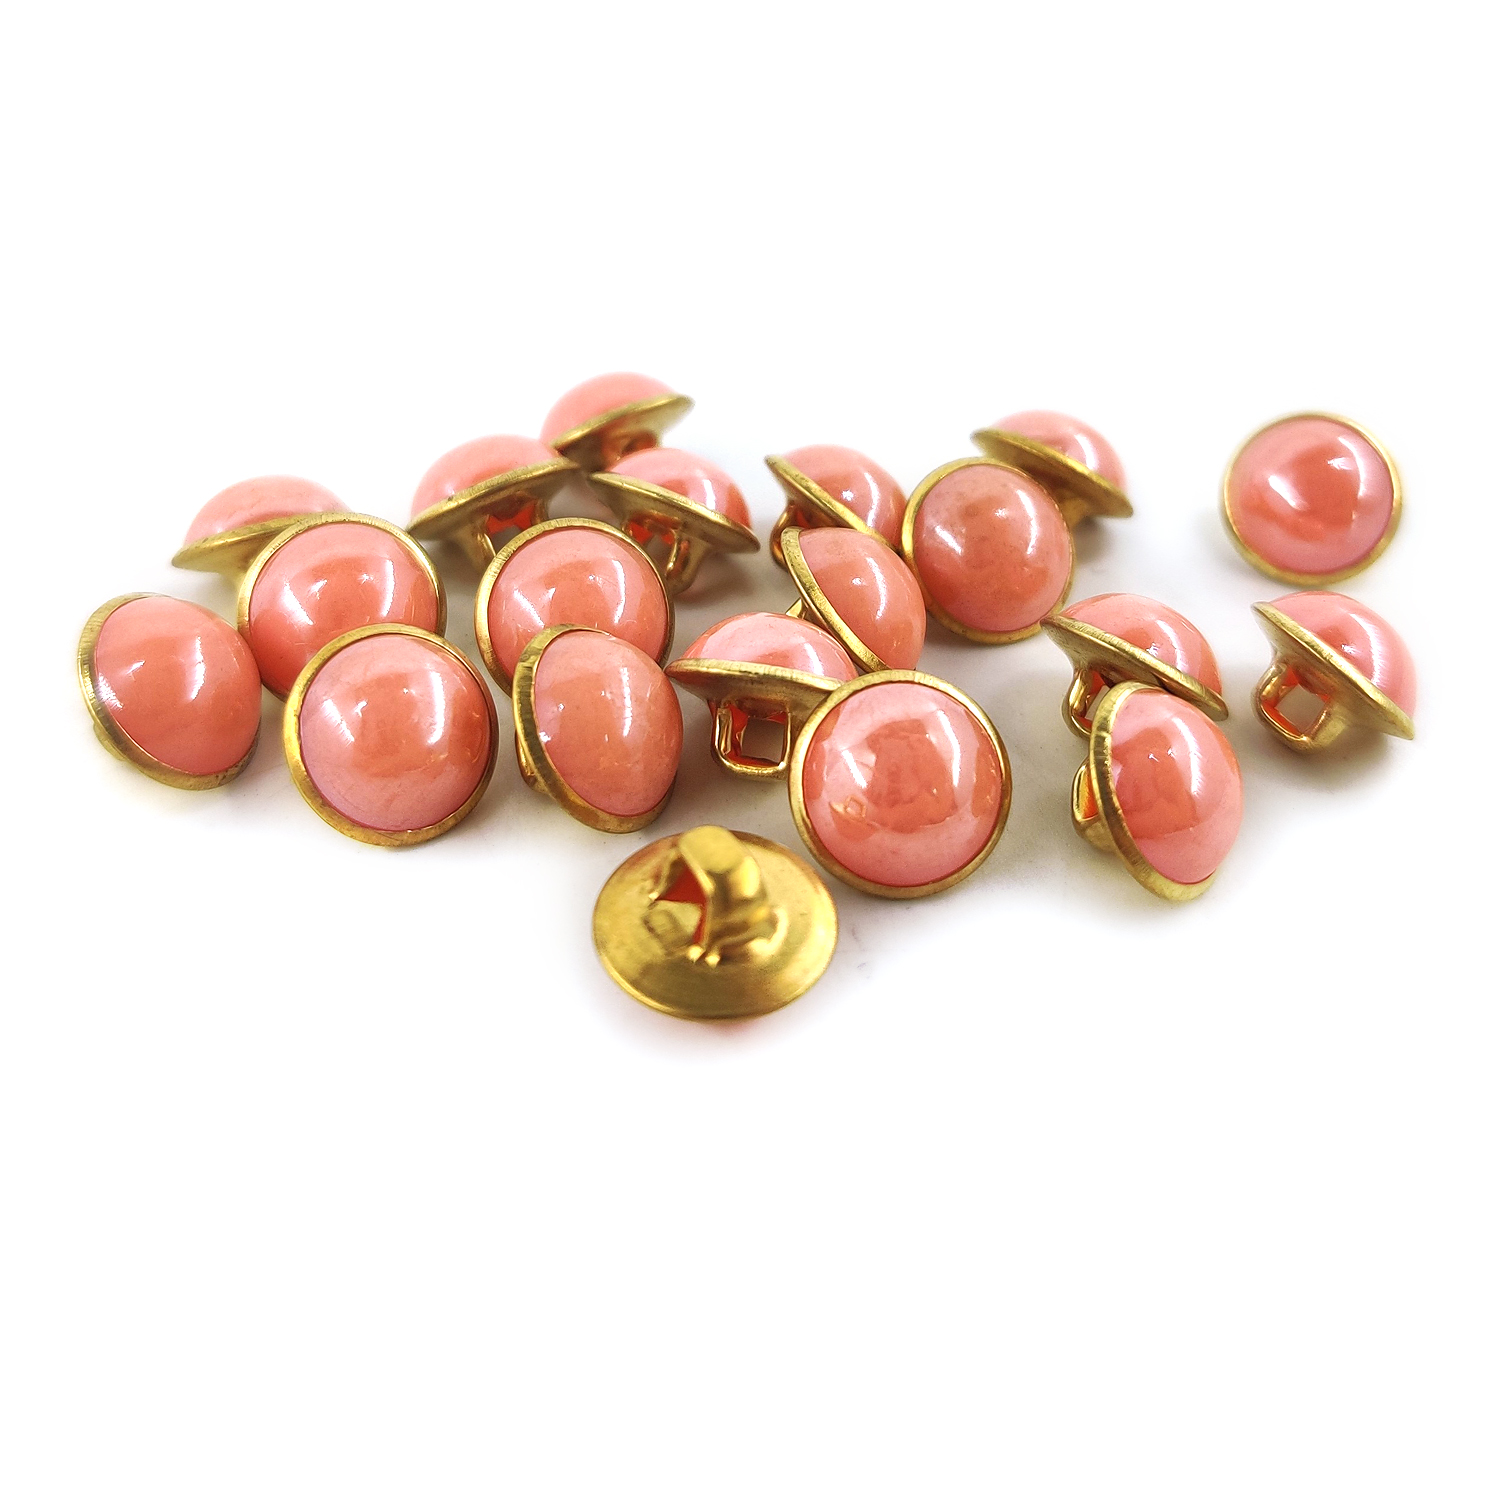 Craftisum Pink Resin Sewing Buttons Brass Metal Base with Shank 30 Pcs - 10mm, 13/32"